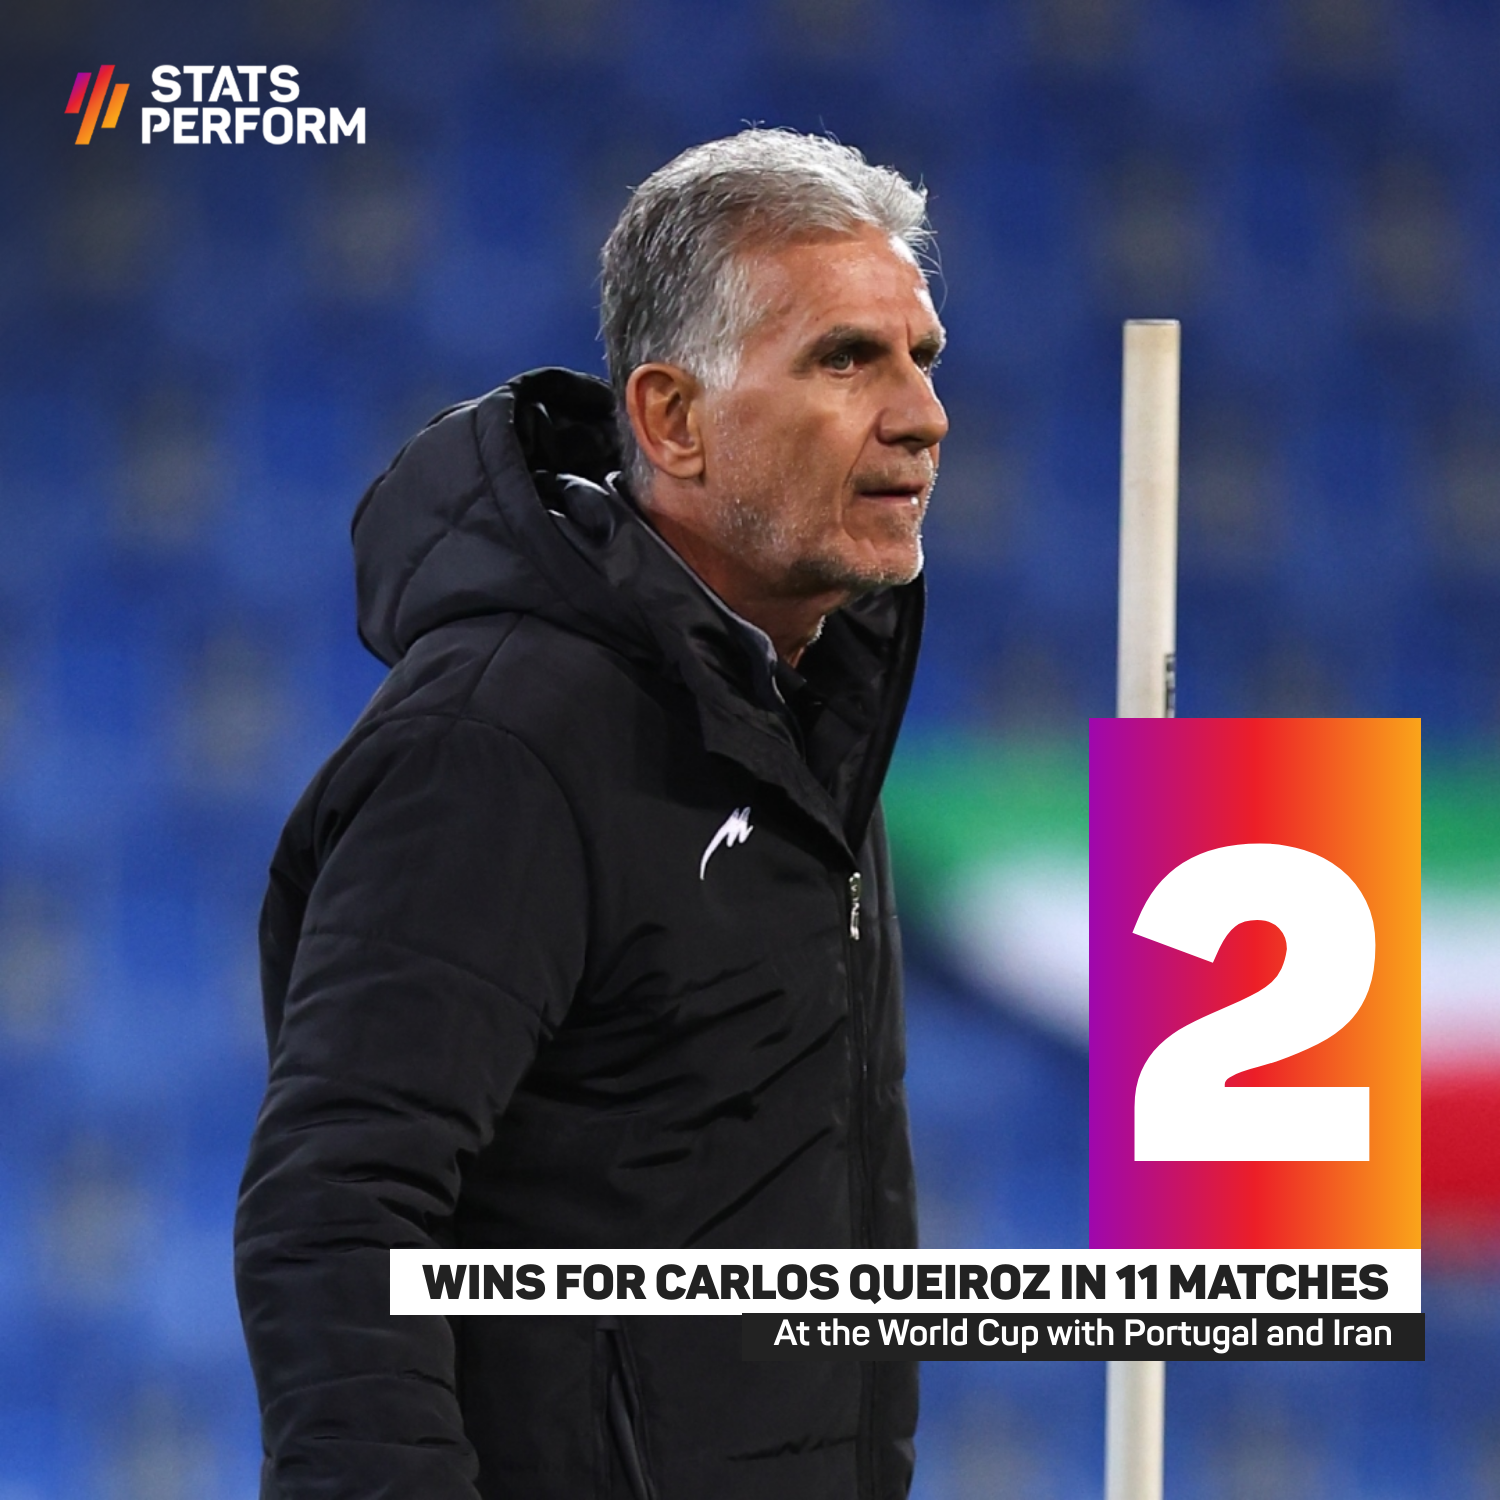 Carlos Queiroz has won two of his 11 World Cup matches